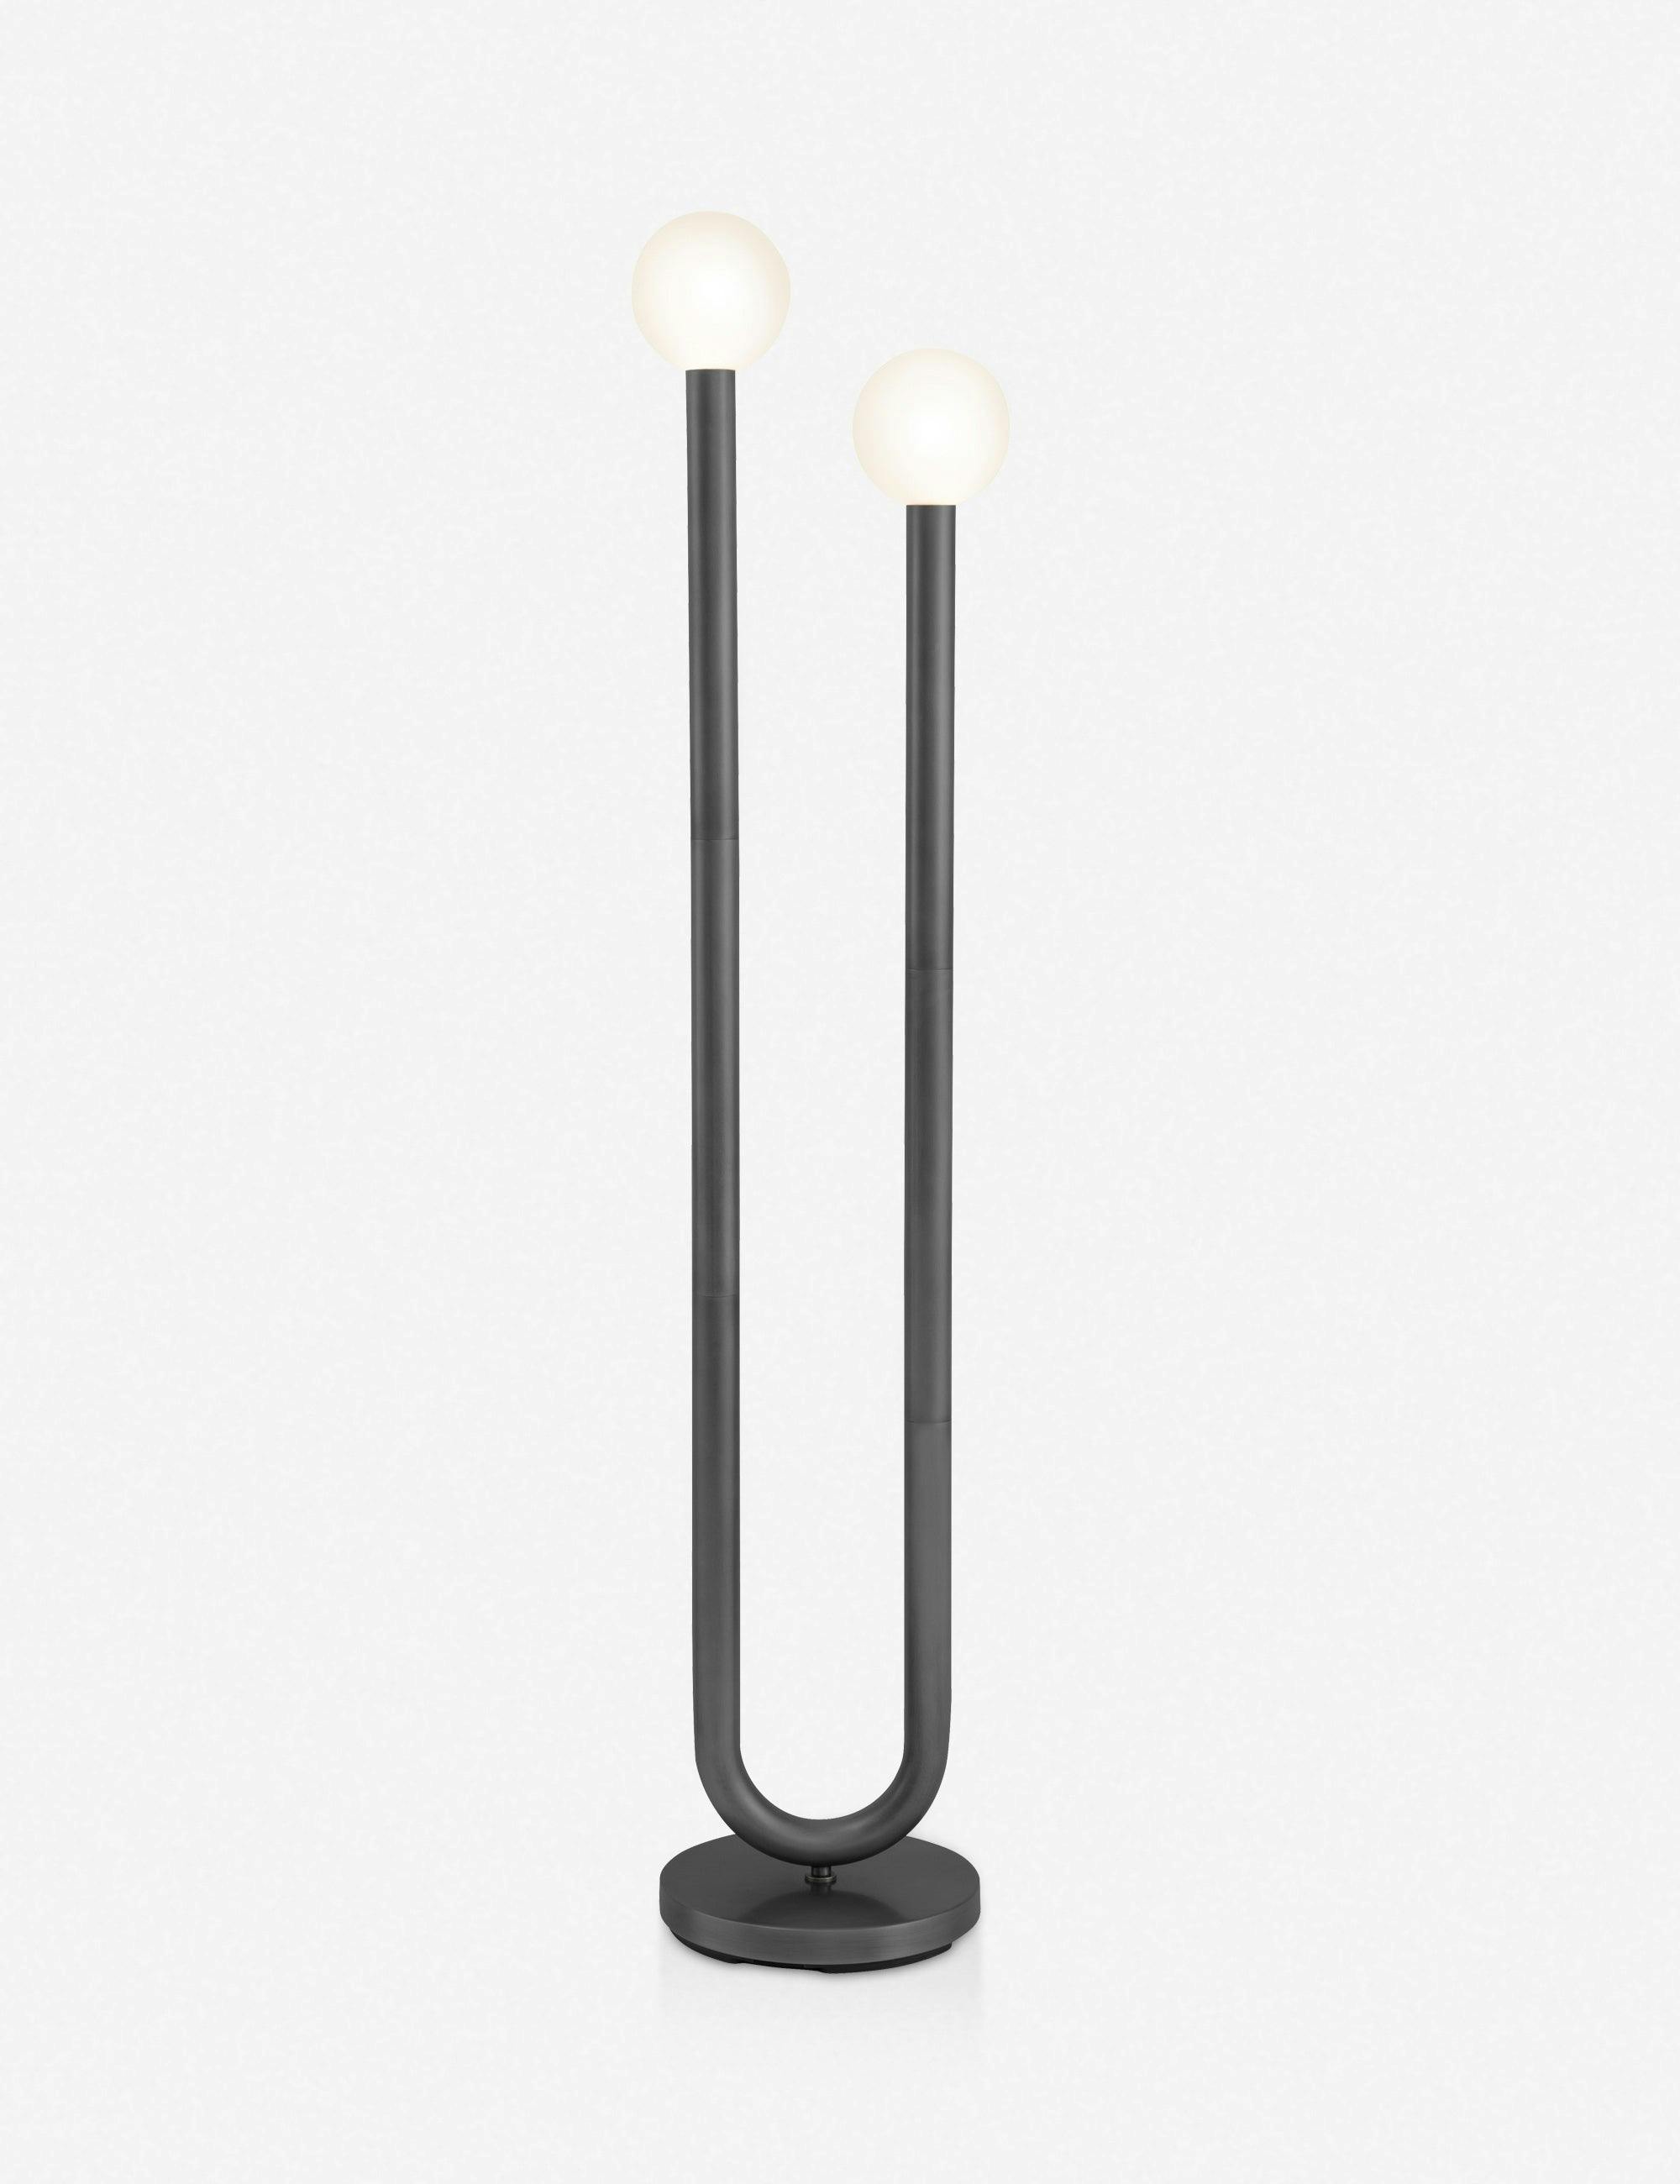 Happy Dual-Pronged Oil Rubbed Bronze Floor Lamp with Matte White Globes